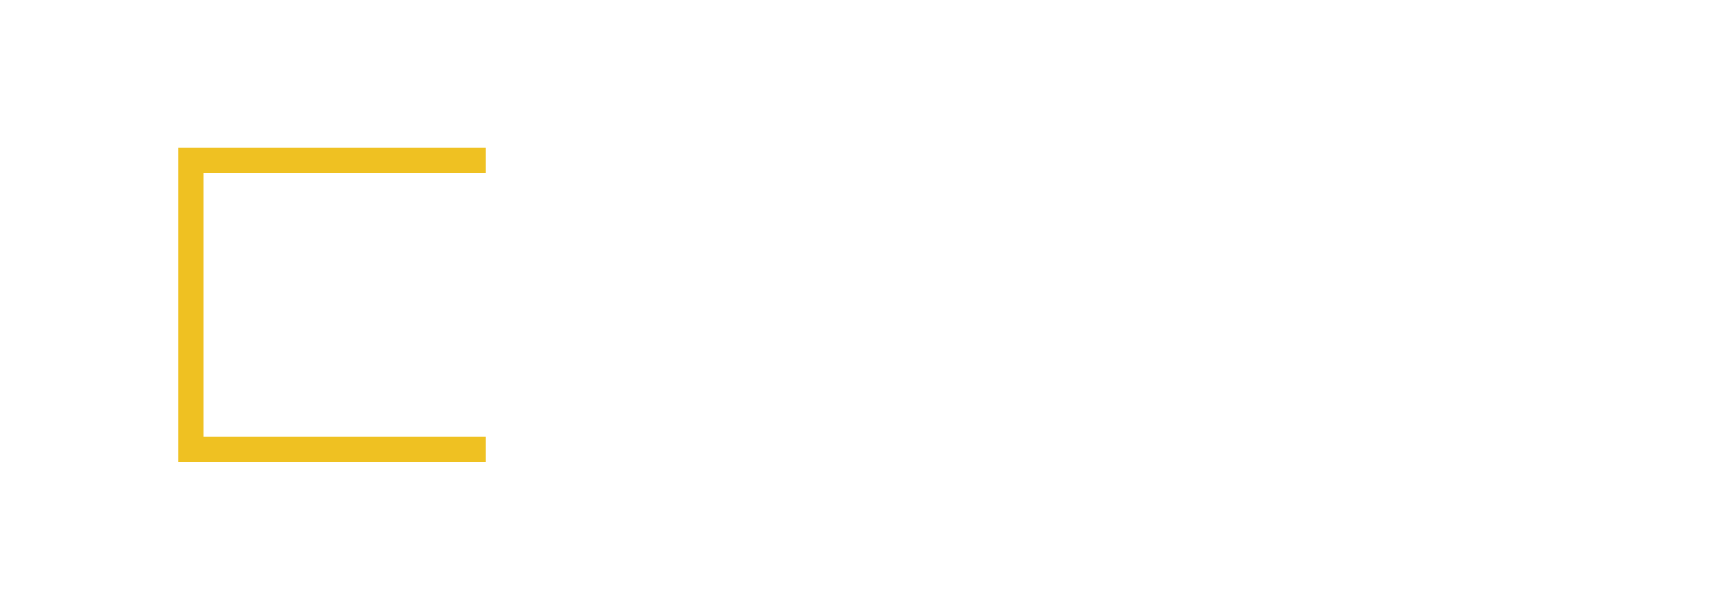 Low Cost Mortgage